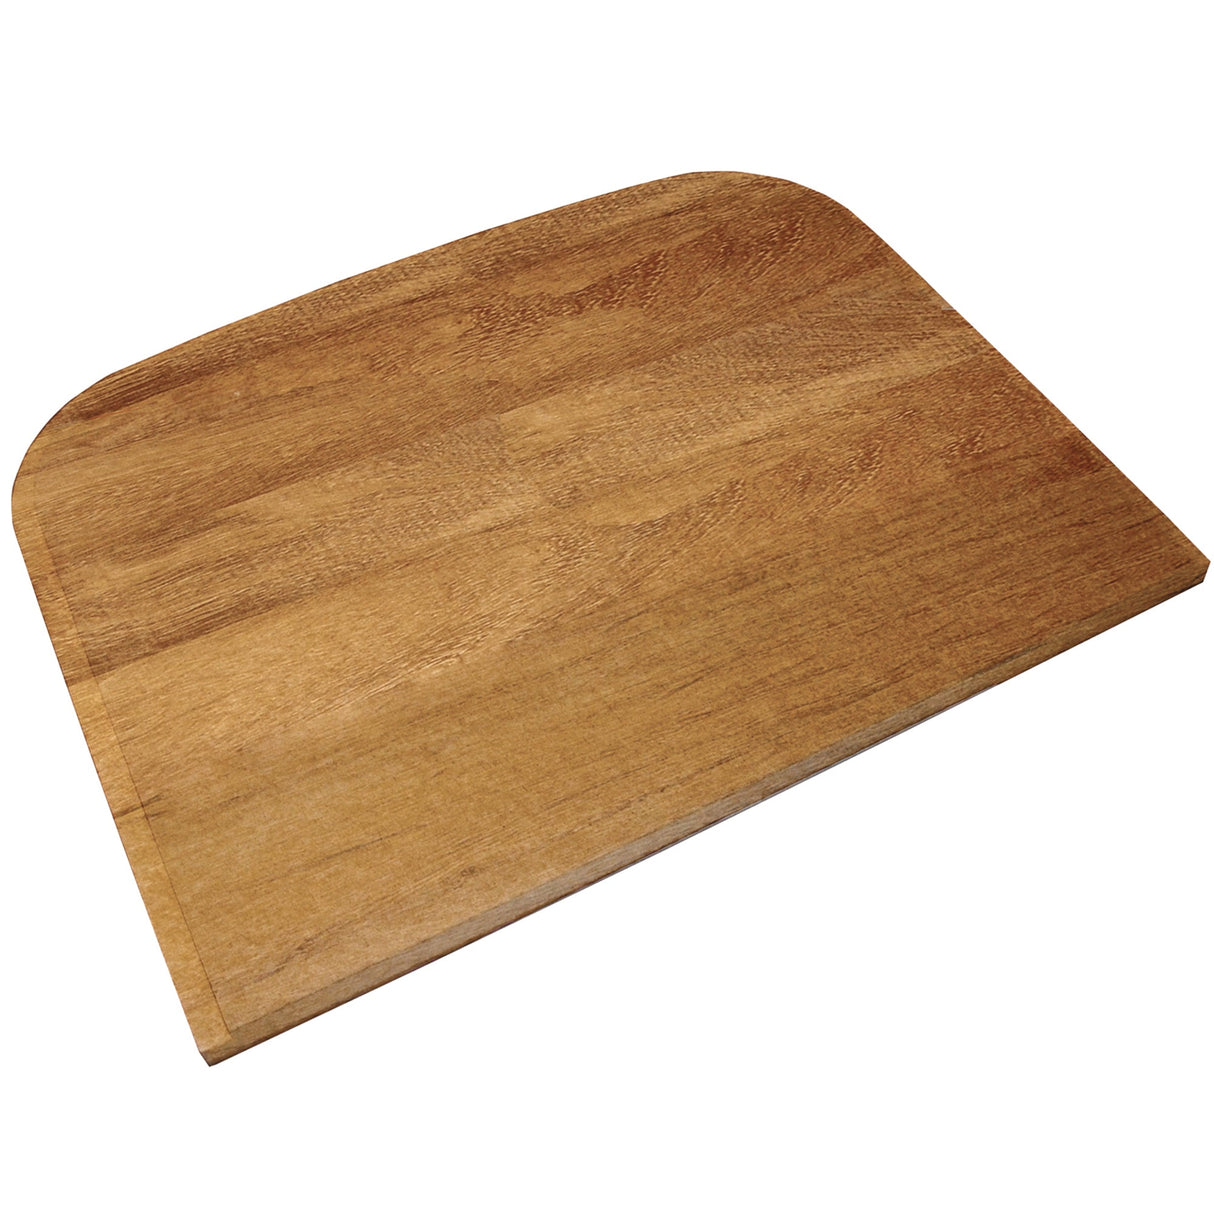 FRANKE GD28-40S 18.4-in. x 14.8-in.  Solid Wood Cutting Board for Grande GDX11028 Sink